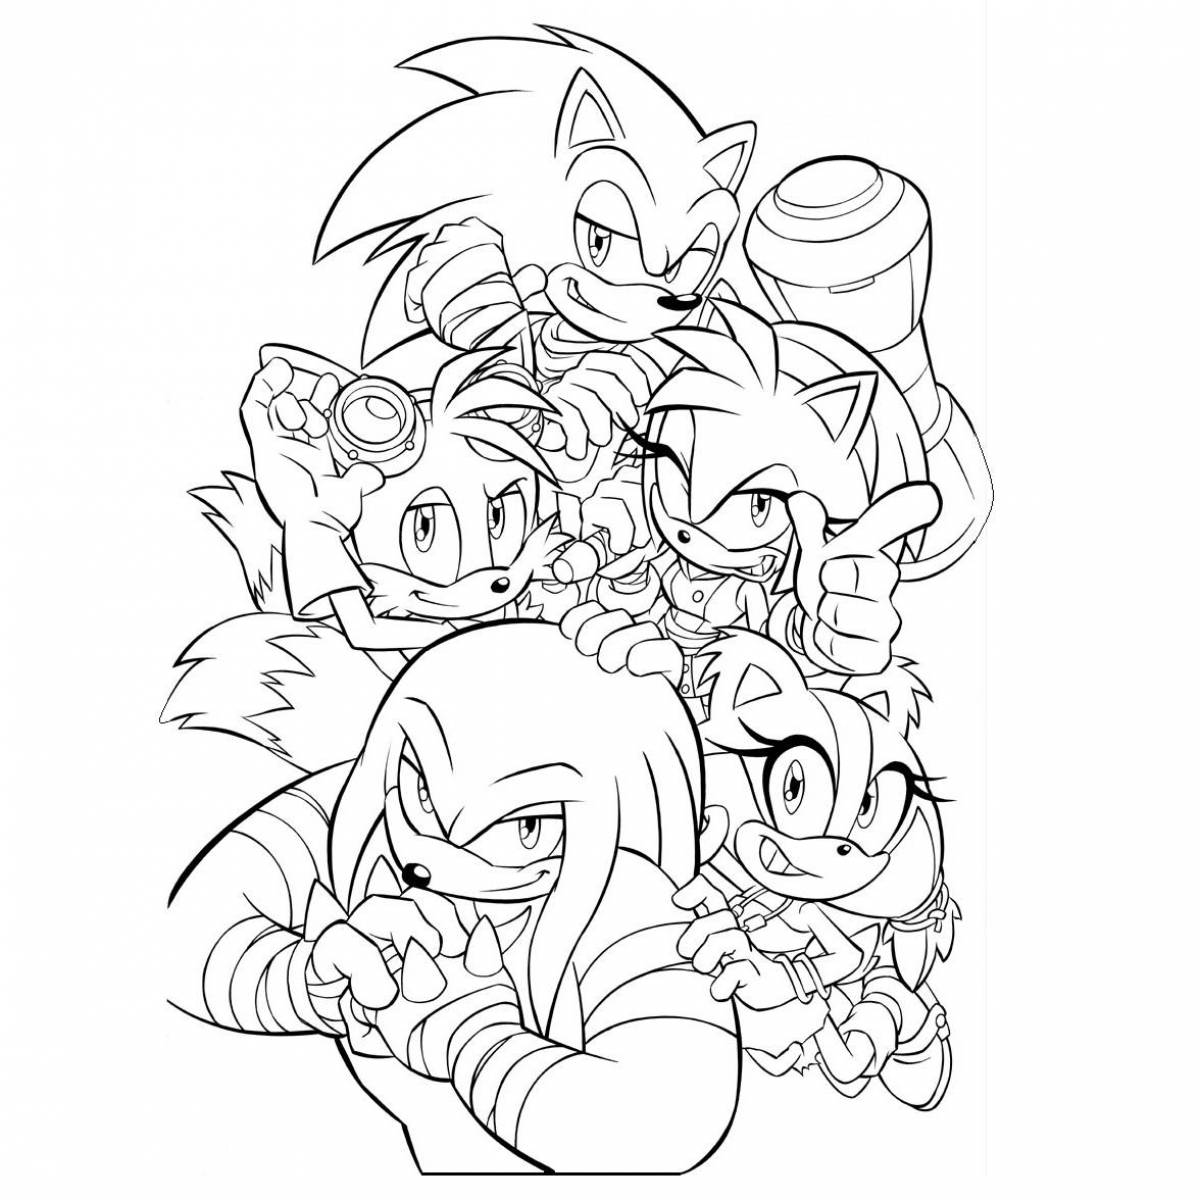 Living sonic and his friends